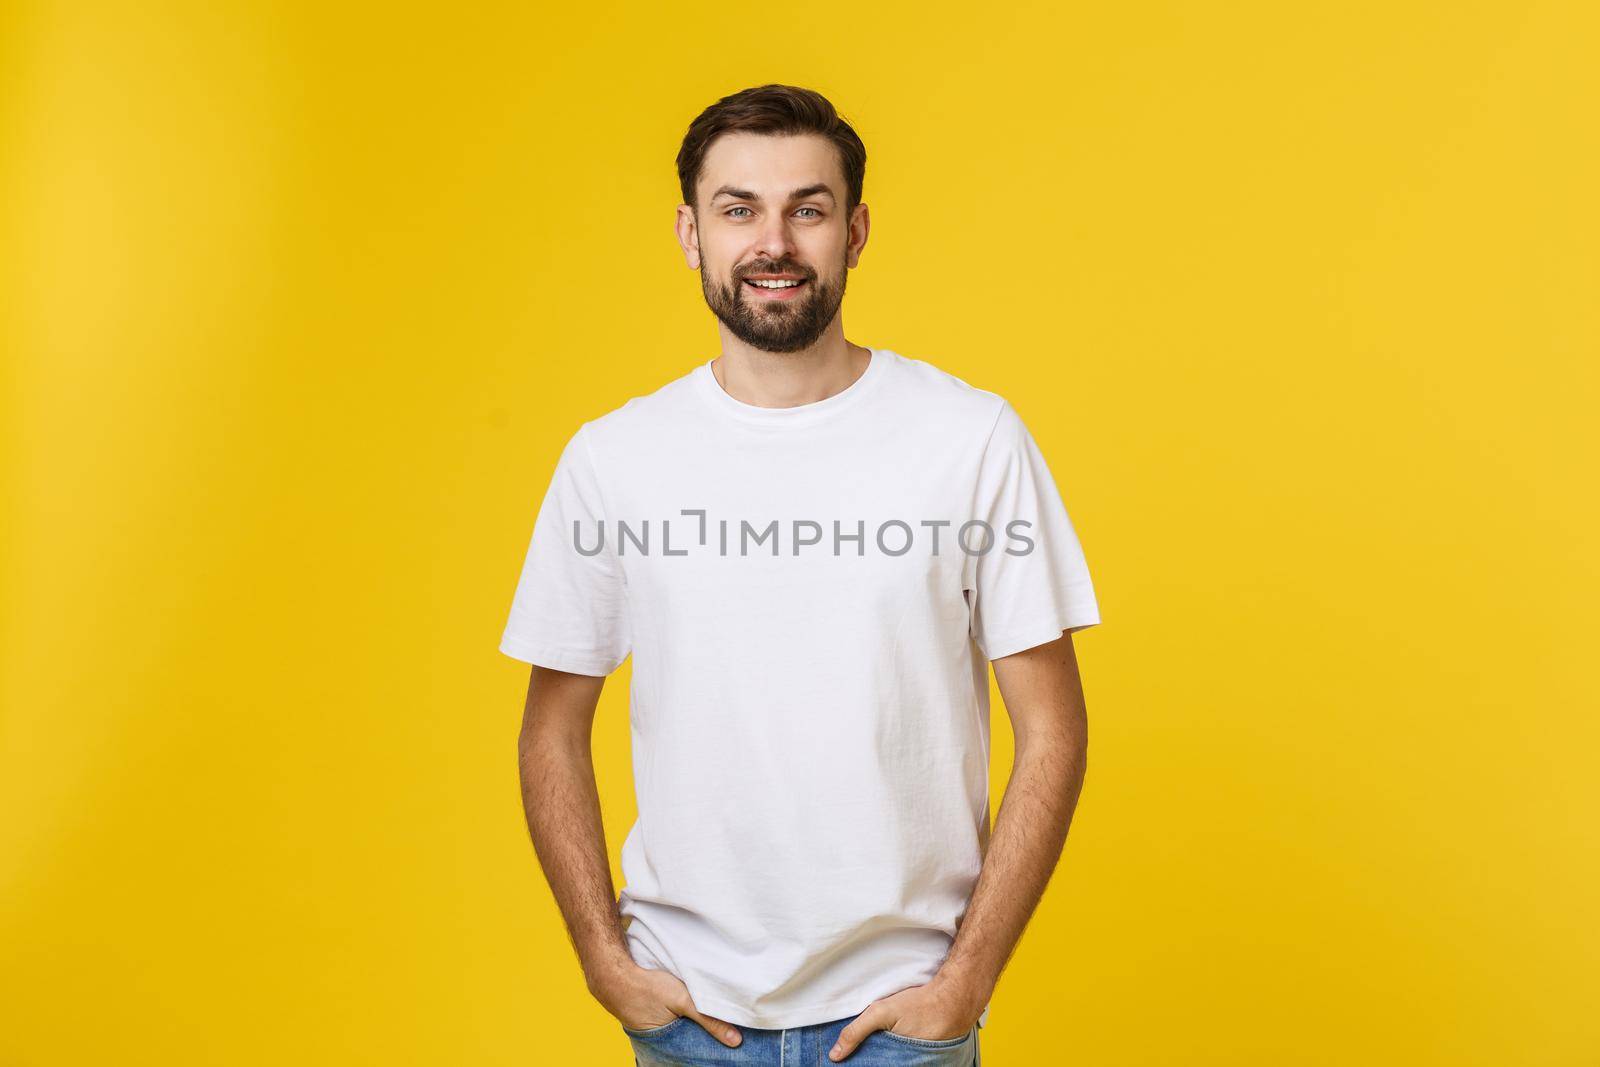 Portrait of a handsome young man smiling against yellow background.